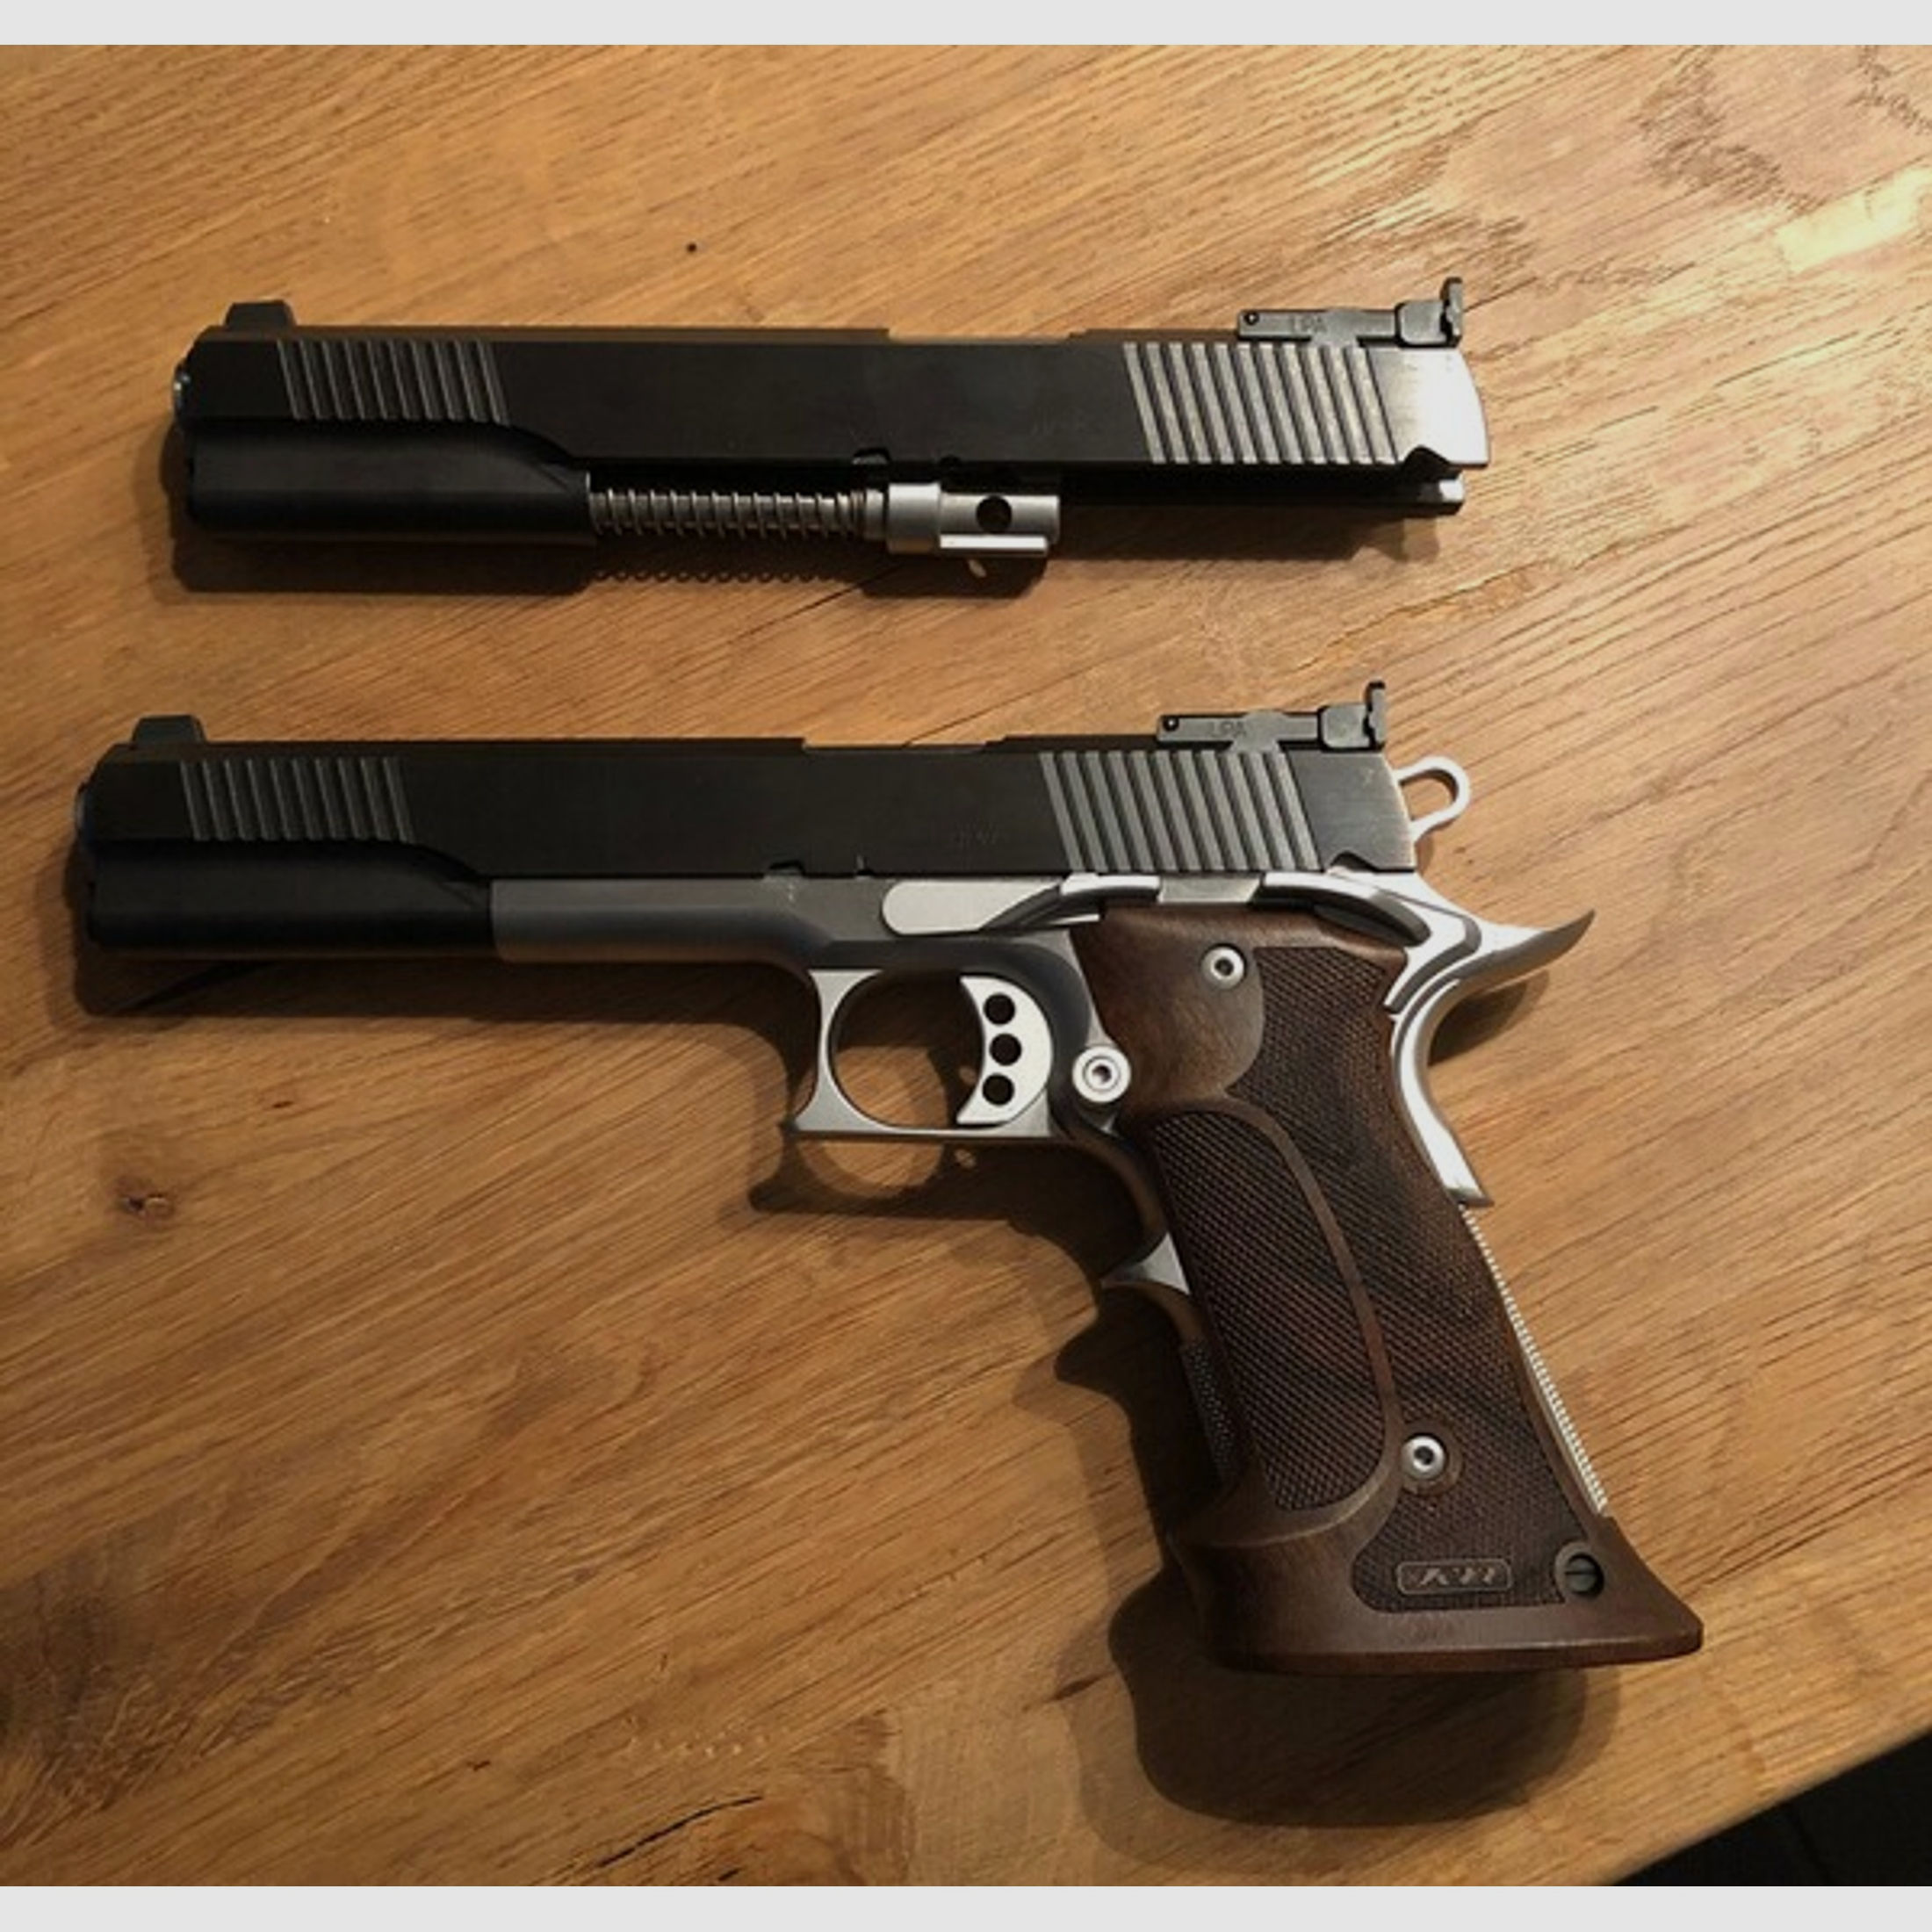 Holden 1911 Pistole 6 Zoll  Duo Tone Kal. .45 ACP mit 6 Zoll Wechselsytem in 9mm Luger